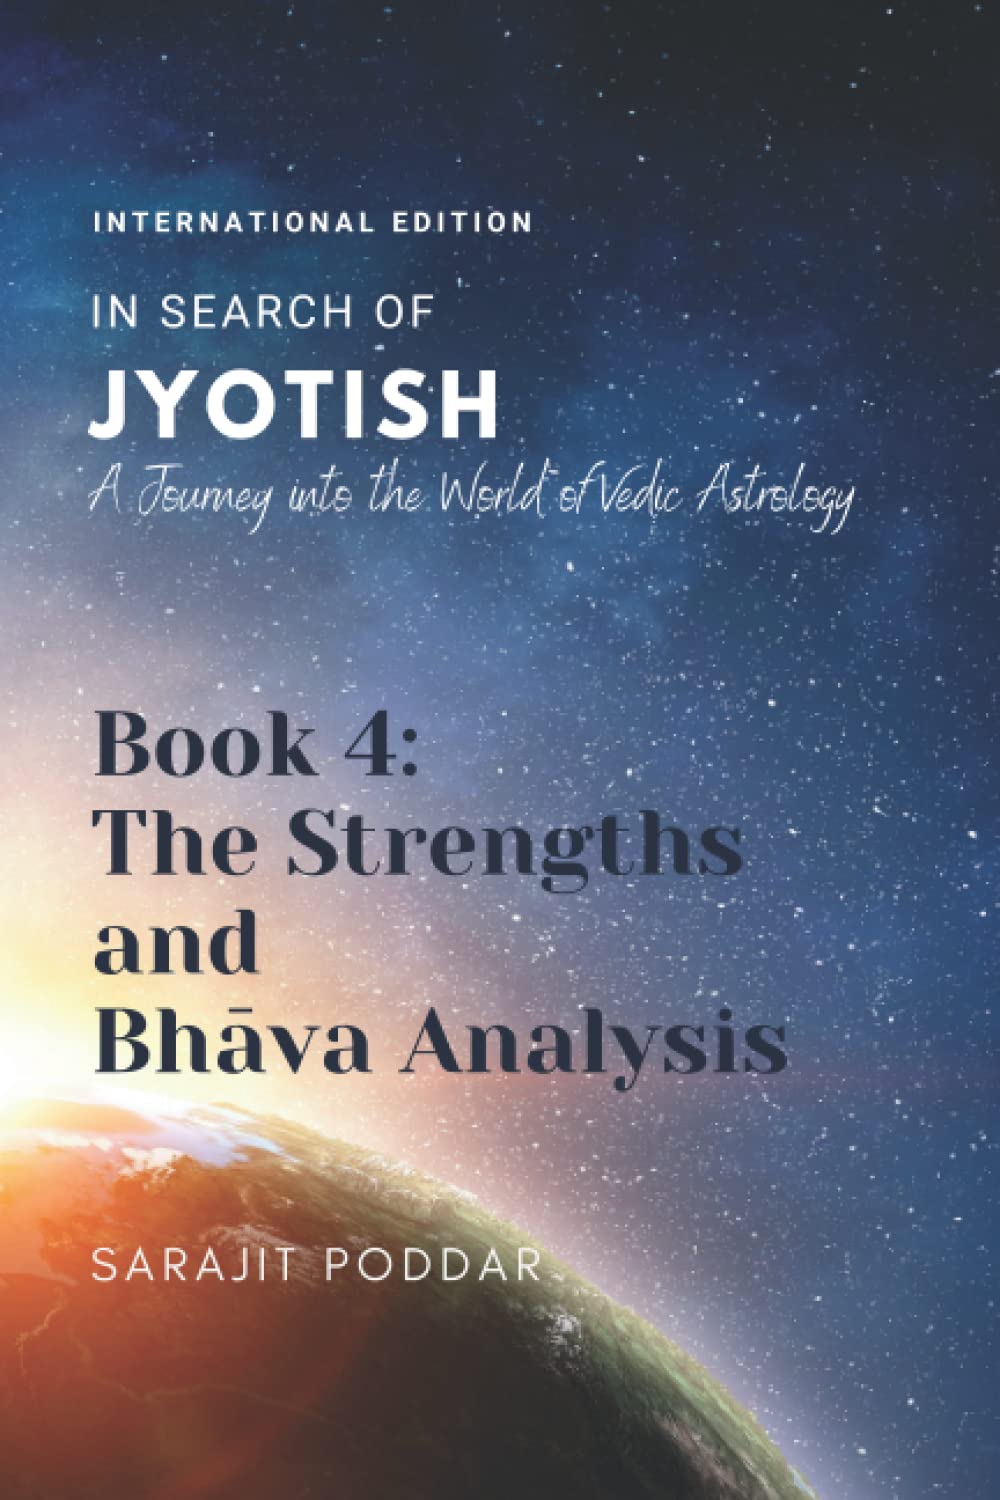 The Strengths and Bhava Analysis: A Journey into the World of Vedic Astrology